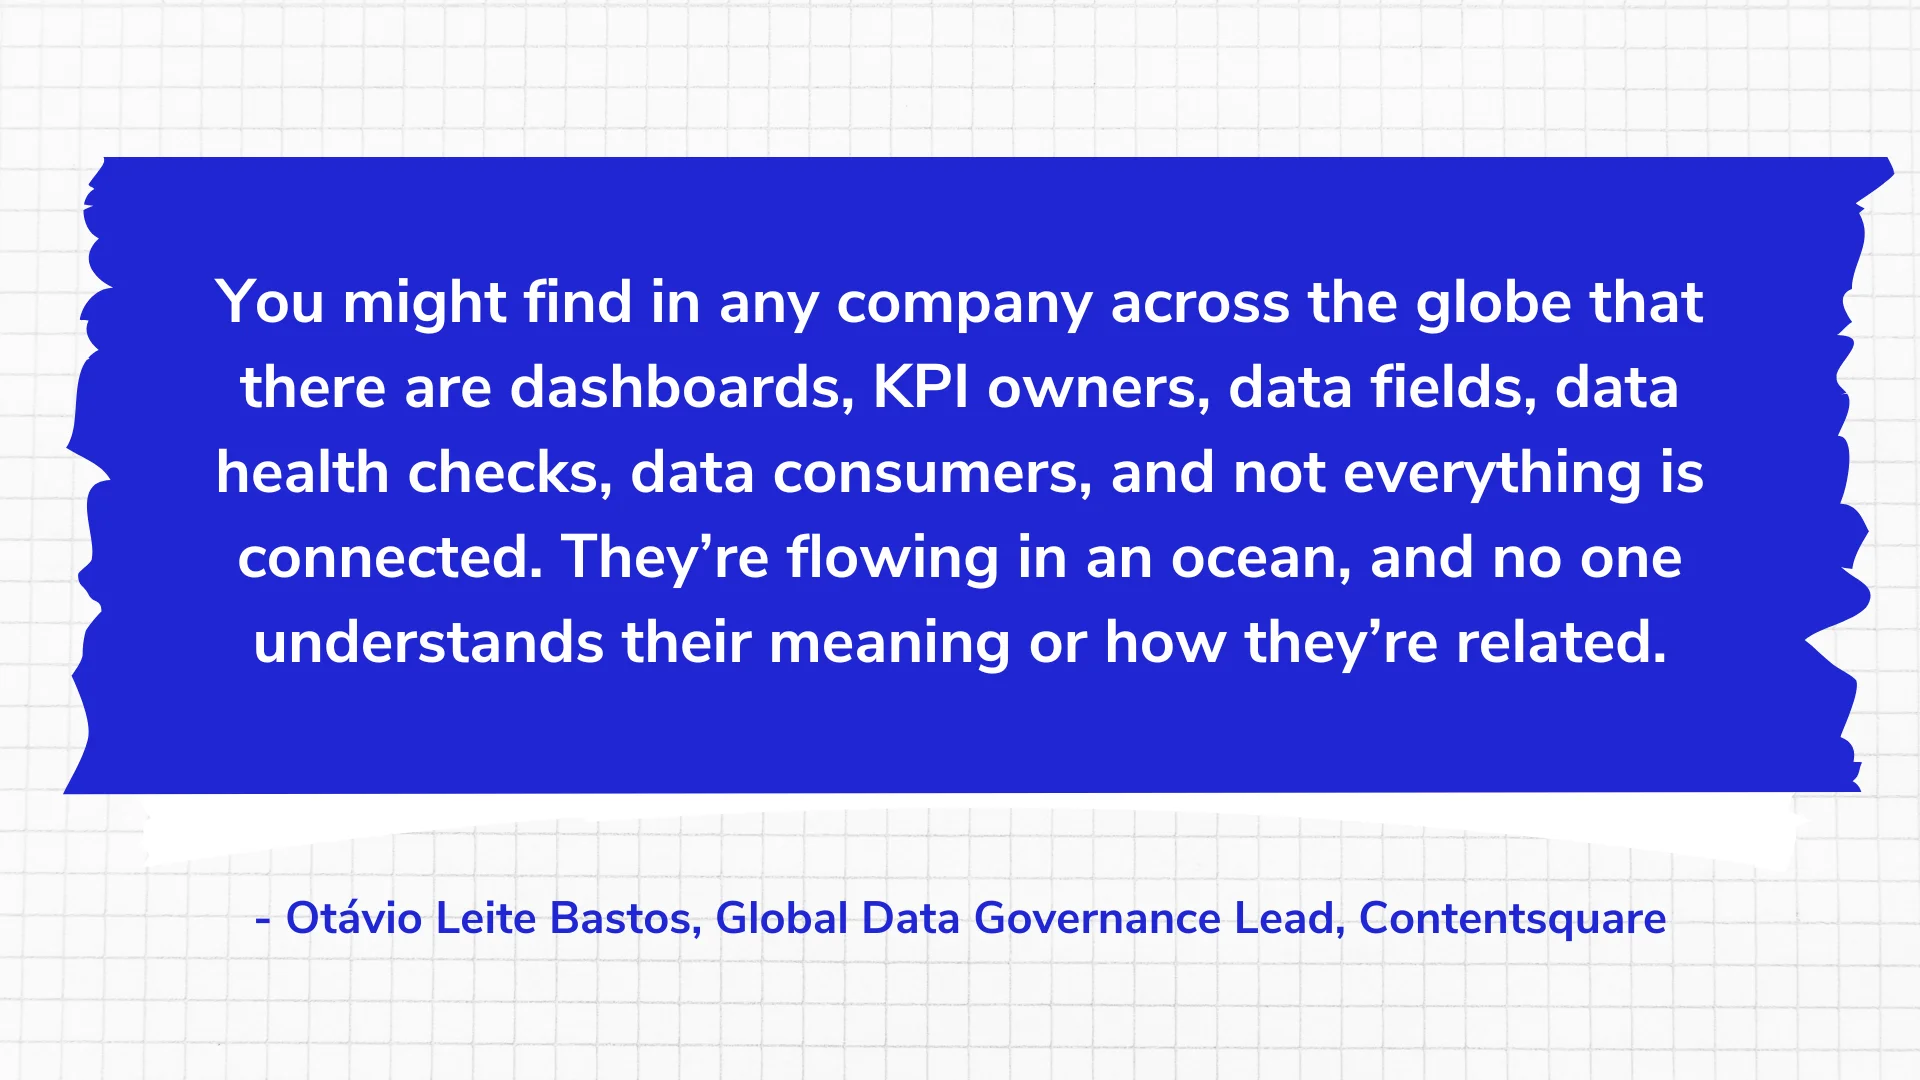 You might find in any company across the globe that there are dashboards, KPI owners, data fields, data health checks, data consumers, and not everything is connected. They’re flowing in an ocean, and no one understands their meaning or how they’re related.